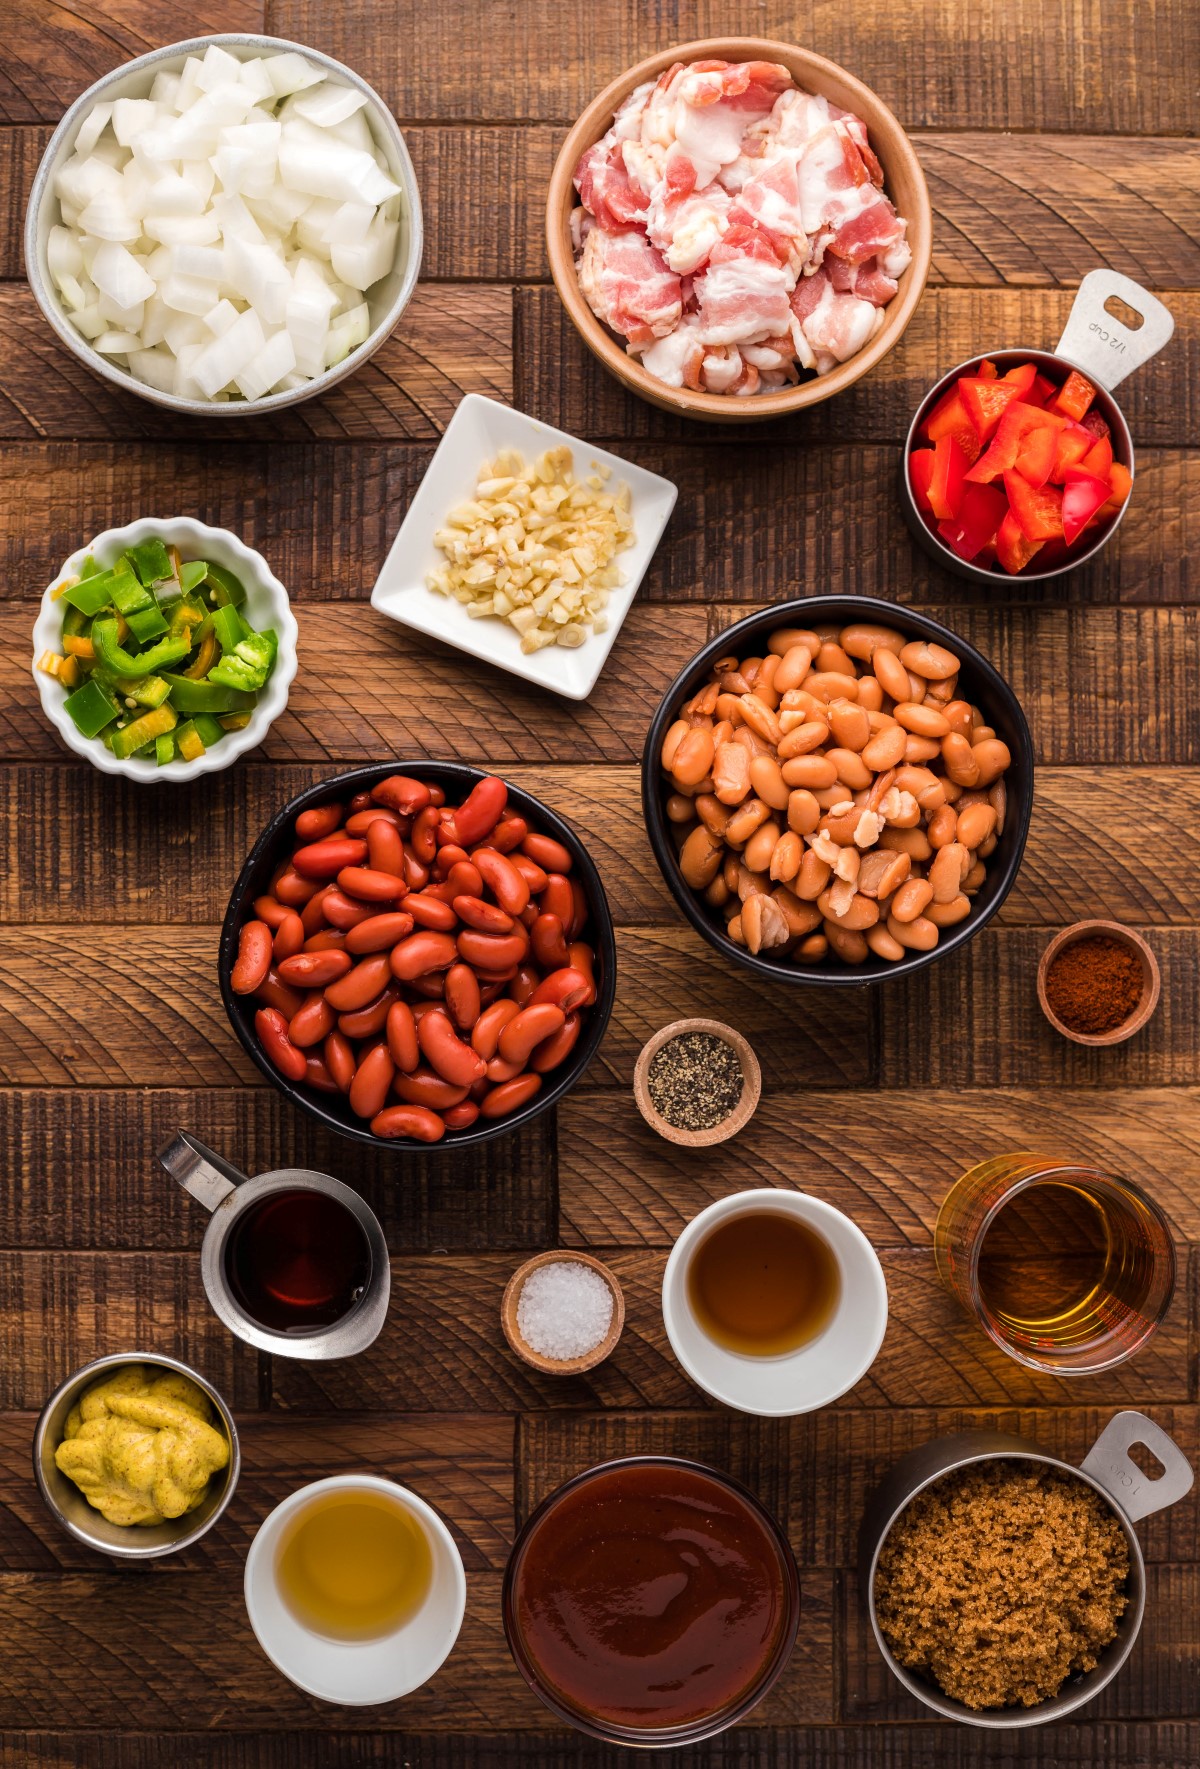 Ingredients for smoked baked beans laid out in bowls on a wooden table.